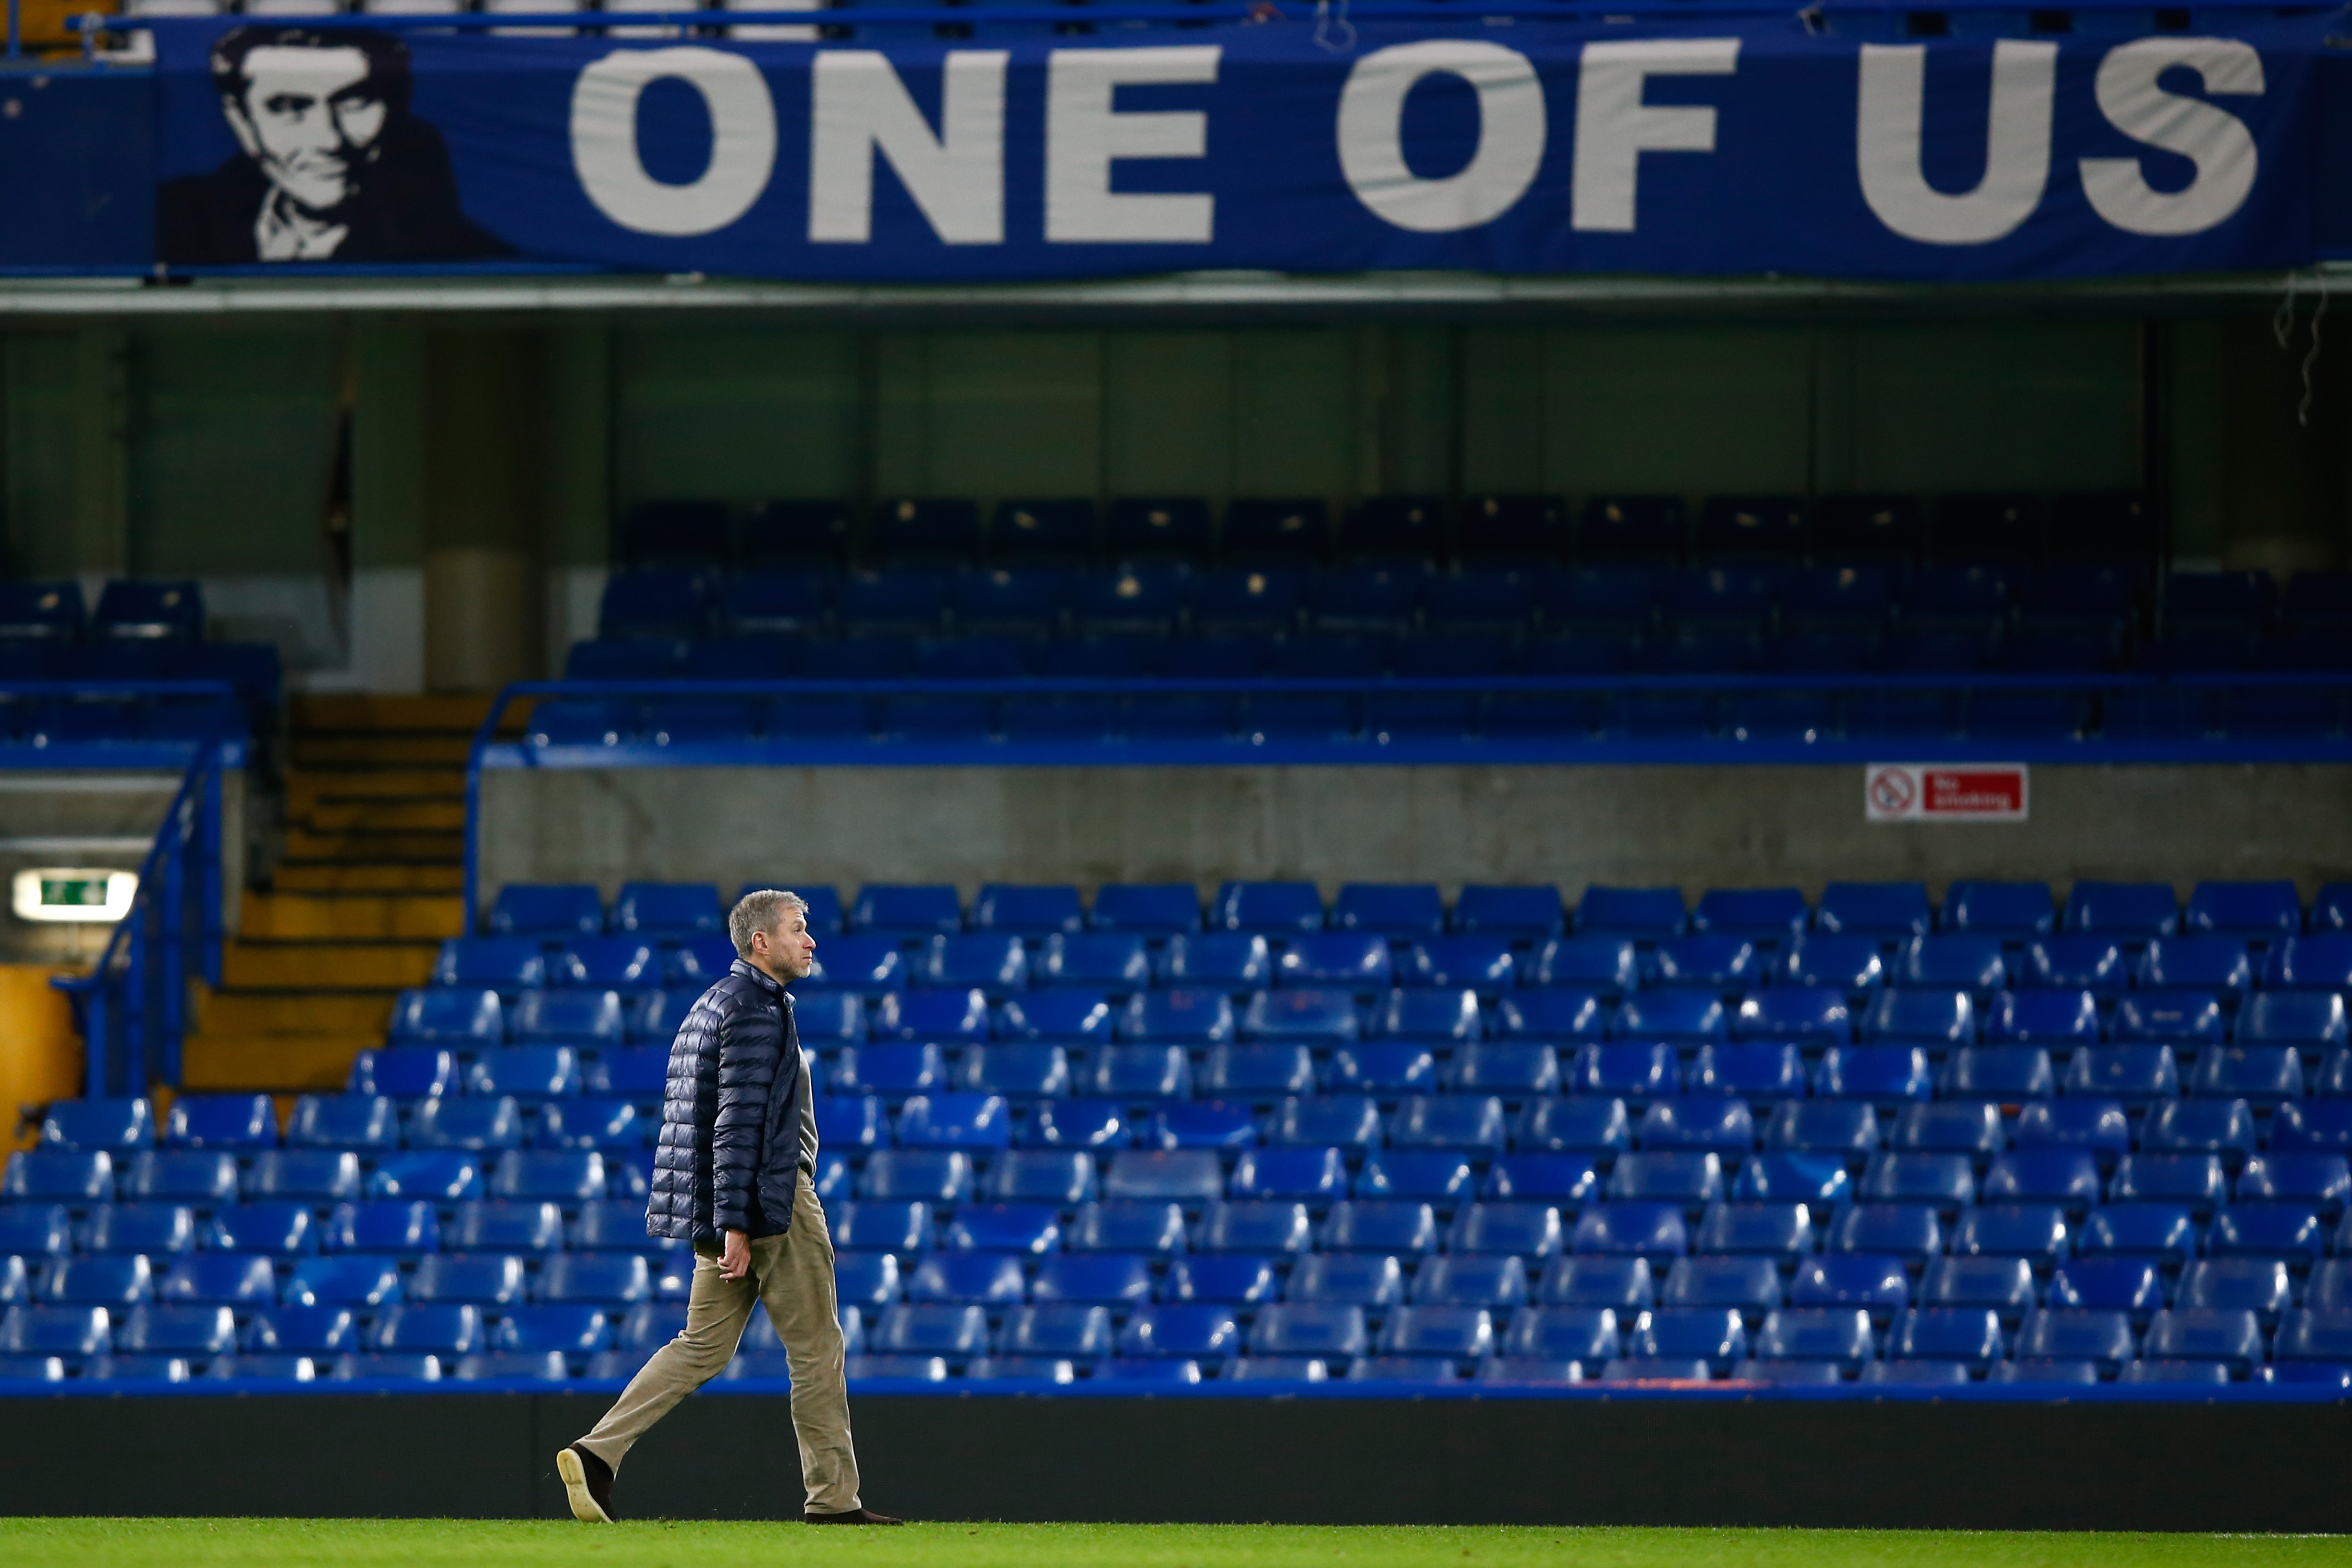 LONDON, ENGLAND - DECEMBER 19: Chelsea owner Roman Abramovich walks past a banner to support Jose Mourinho after their 3-1 win in the Barclays Premier League match between Chelsea and Sunderland at Stamford Bridge on December 19, 2015 in London, England. (Photo by Clive Rose/Getty Images)